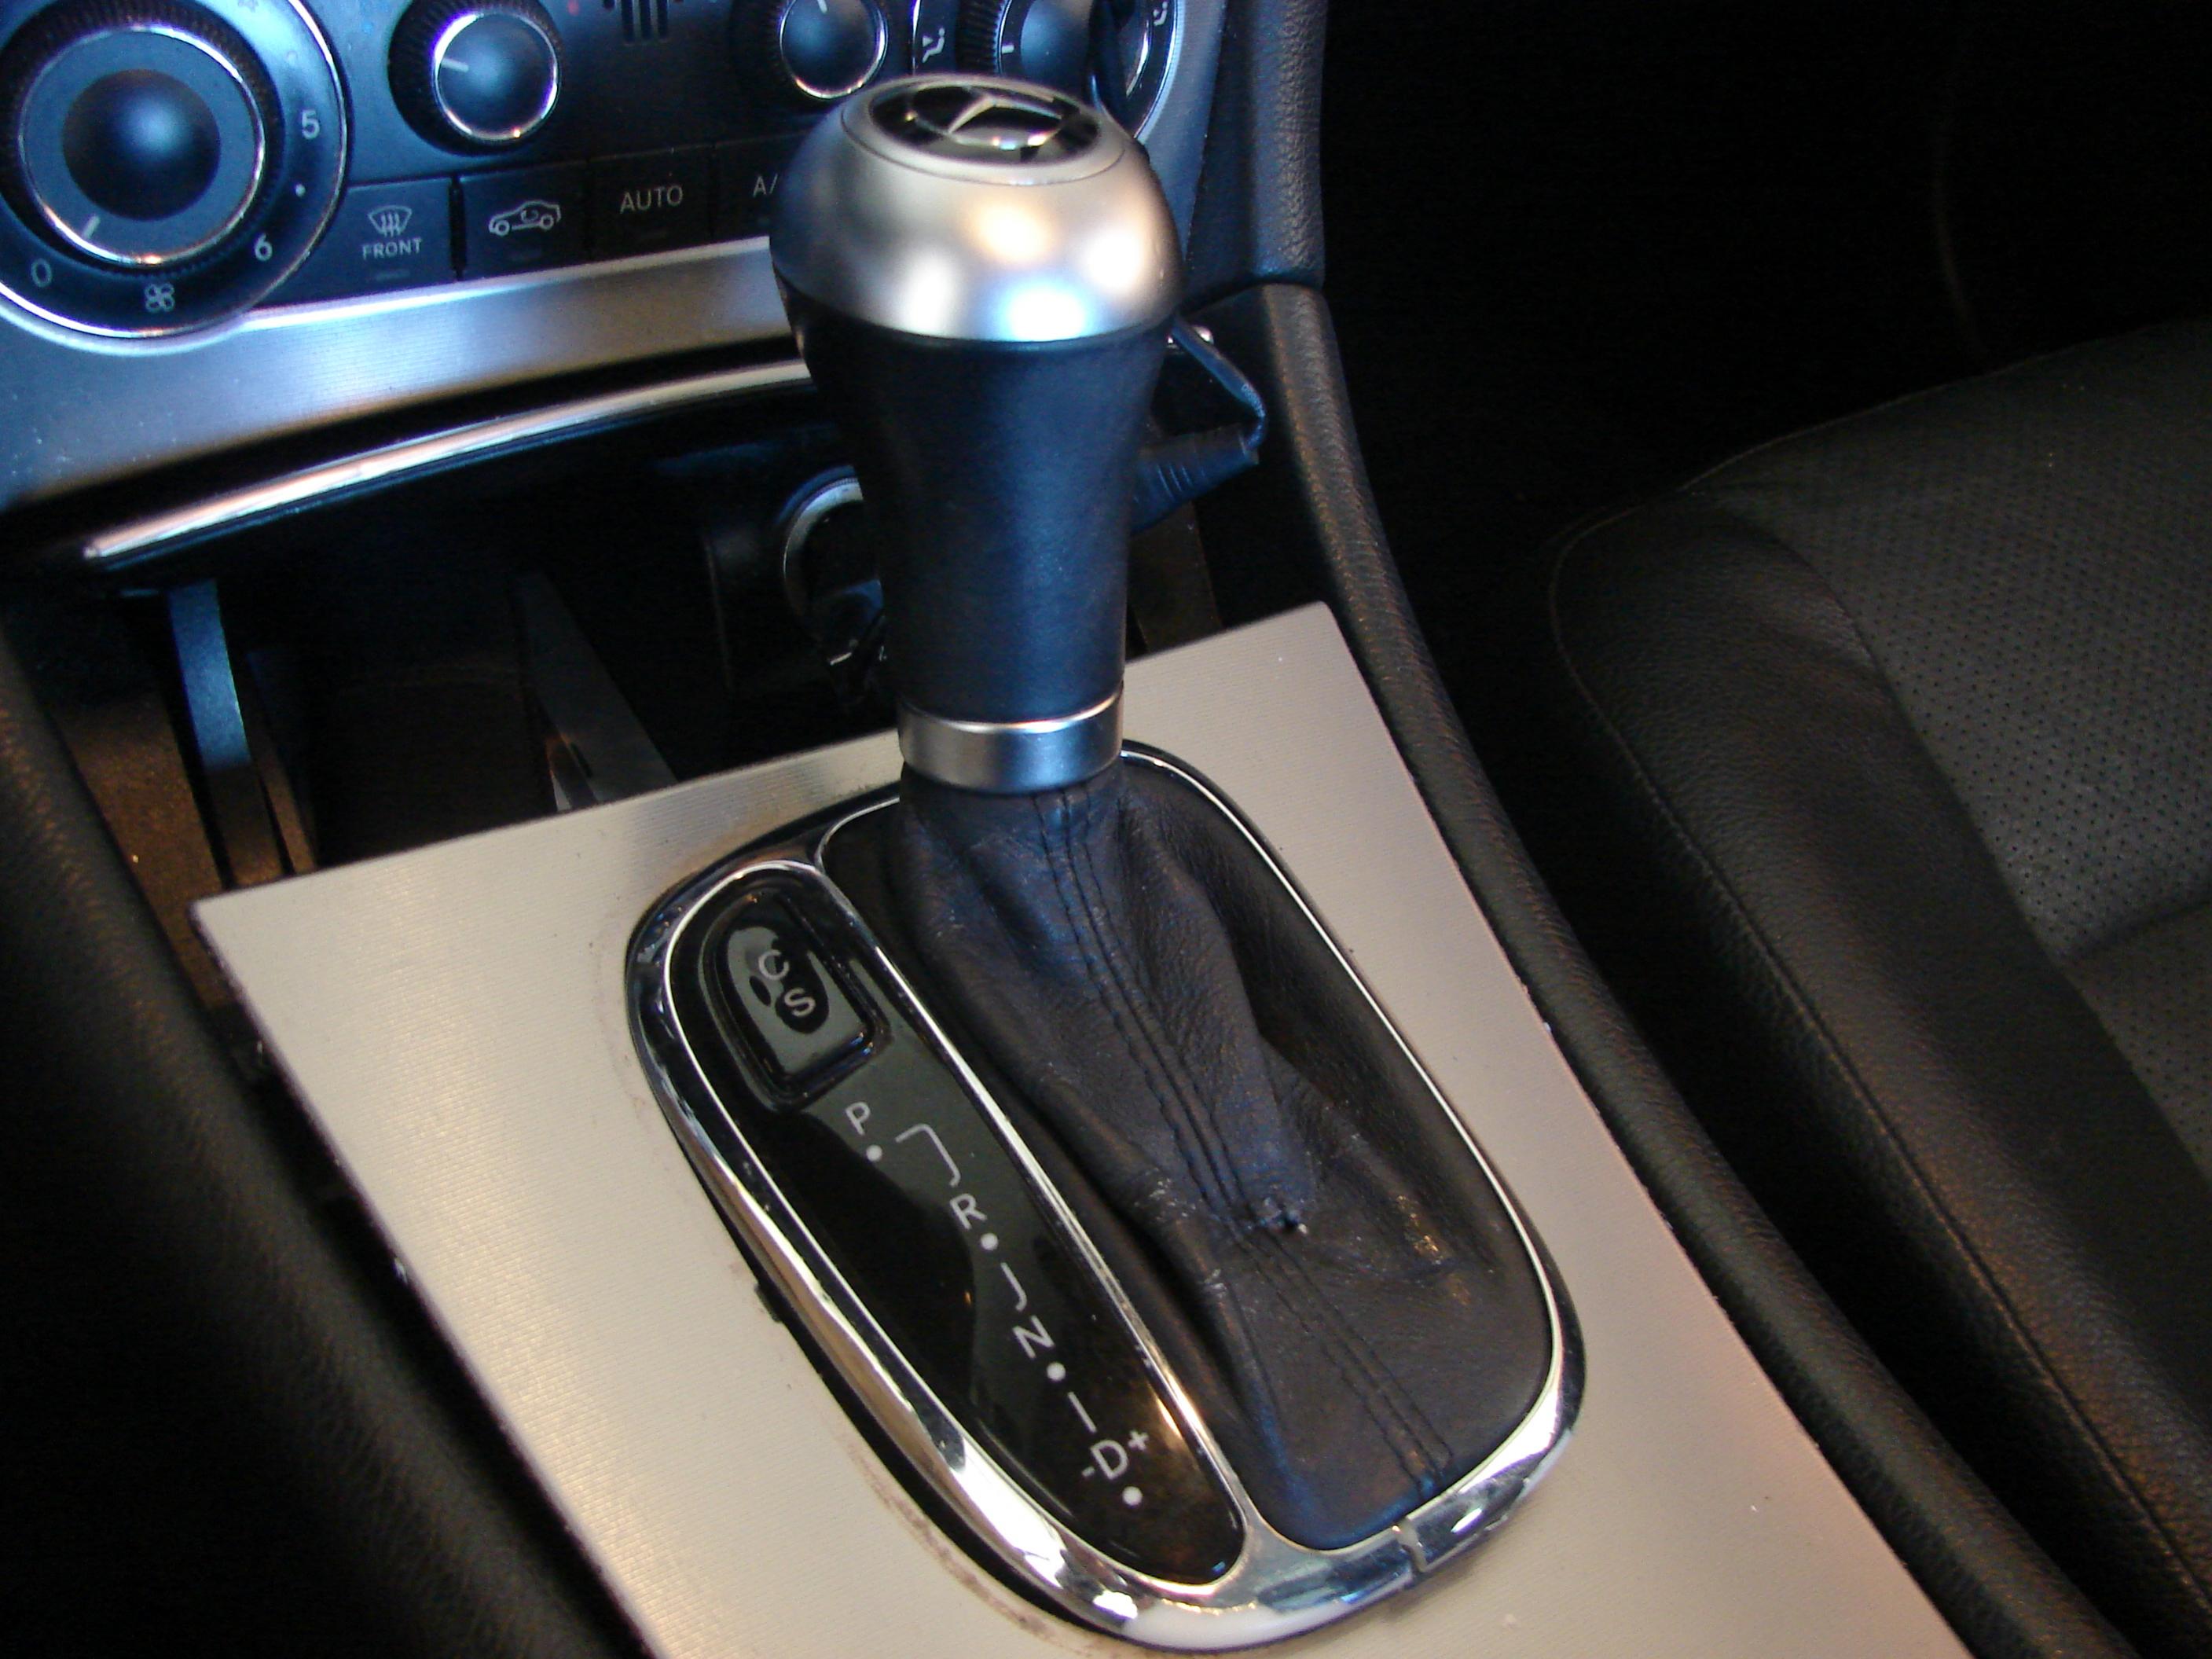 2006 C230 Sport Automatic Shifter Knob Removal - MBWorld.org Forums